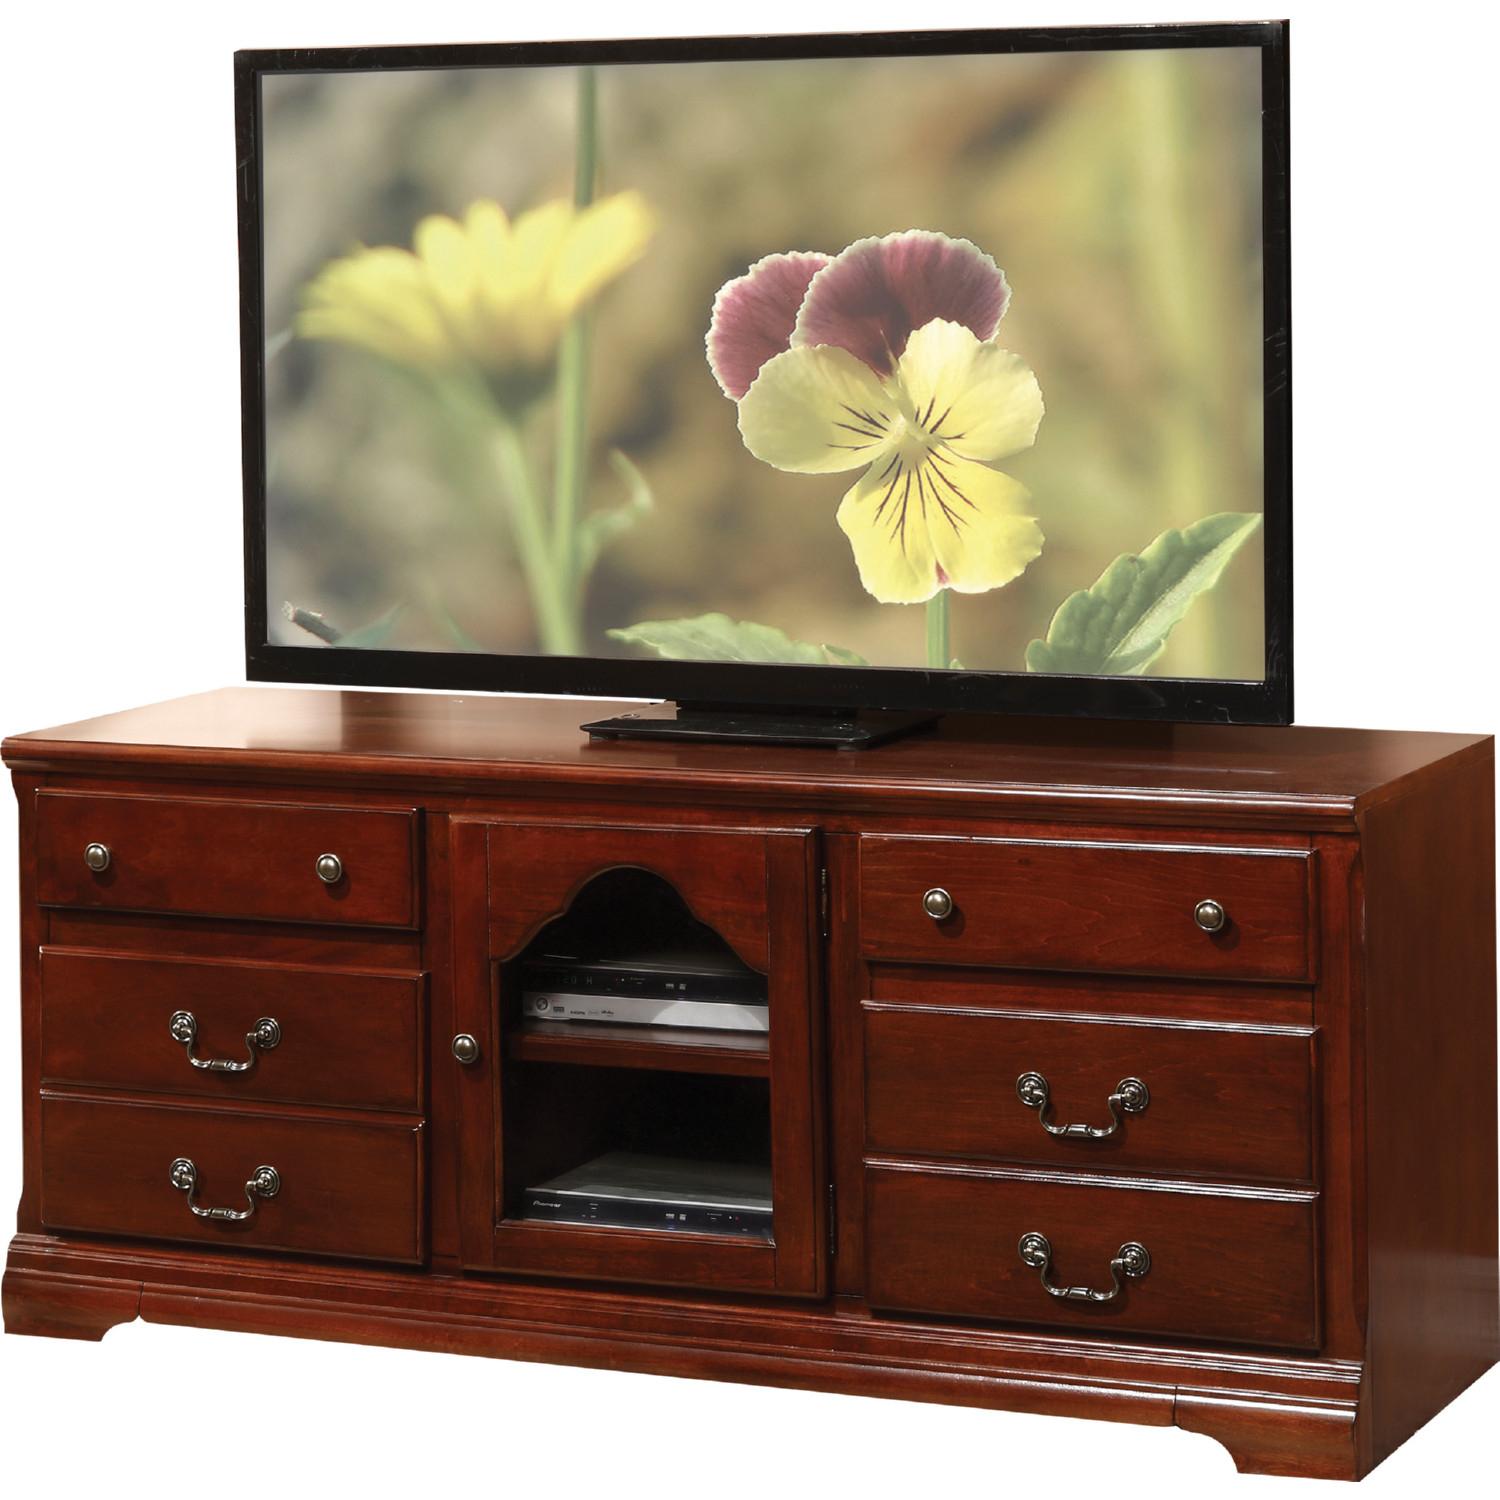 Traditional, Transitional TV Stand Hercules 91113 in Cherry 